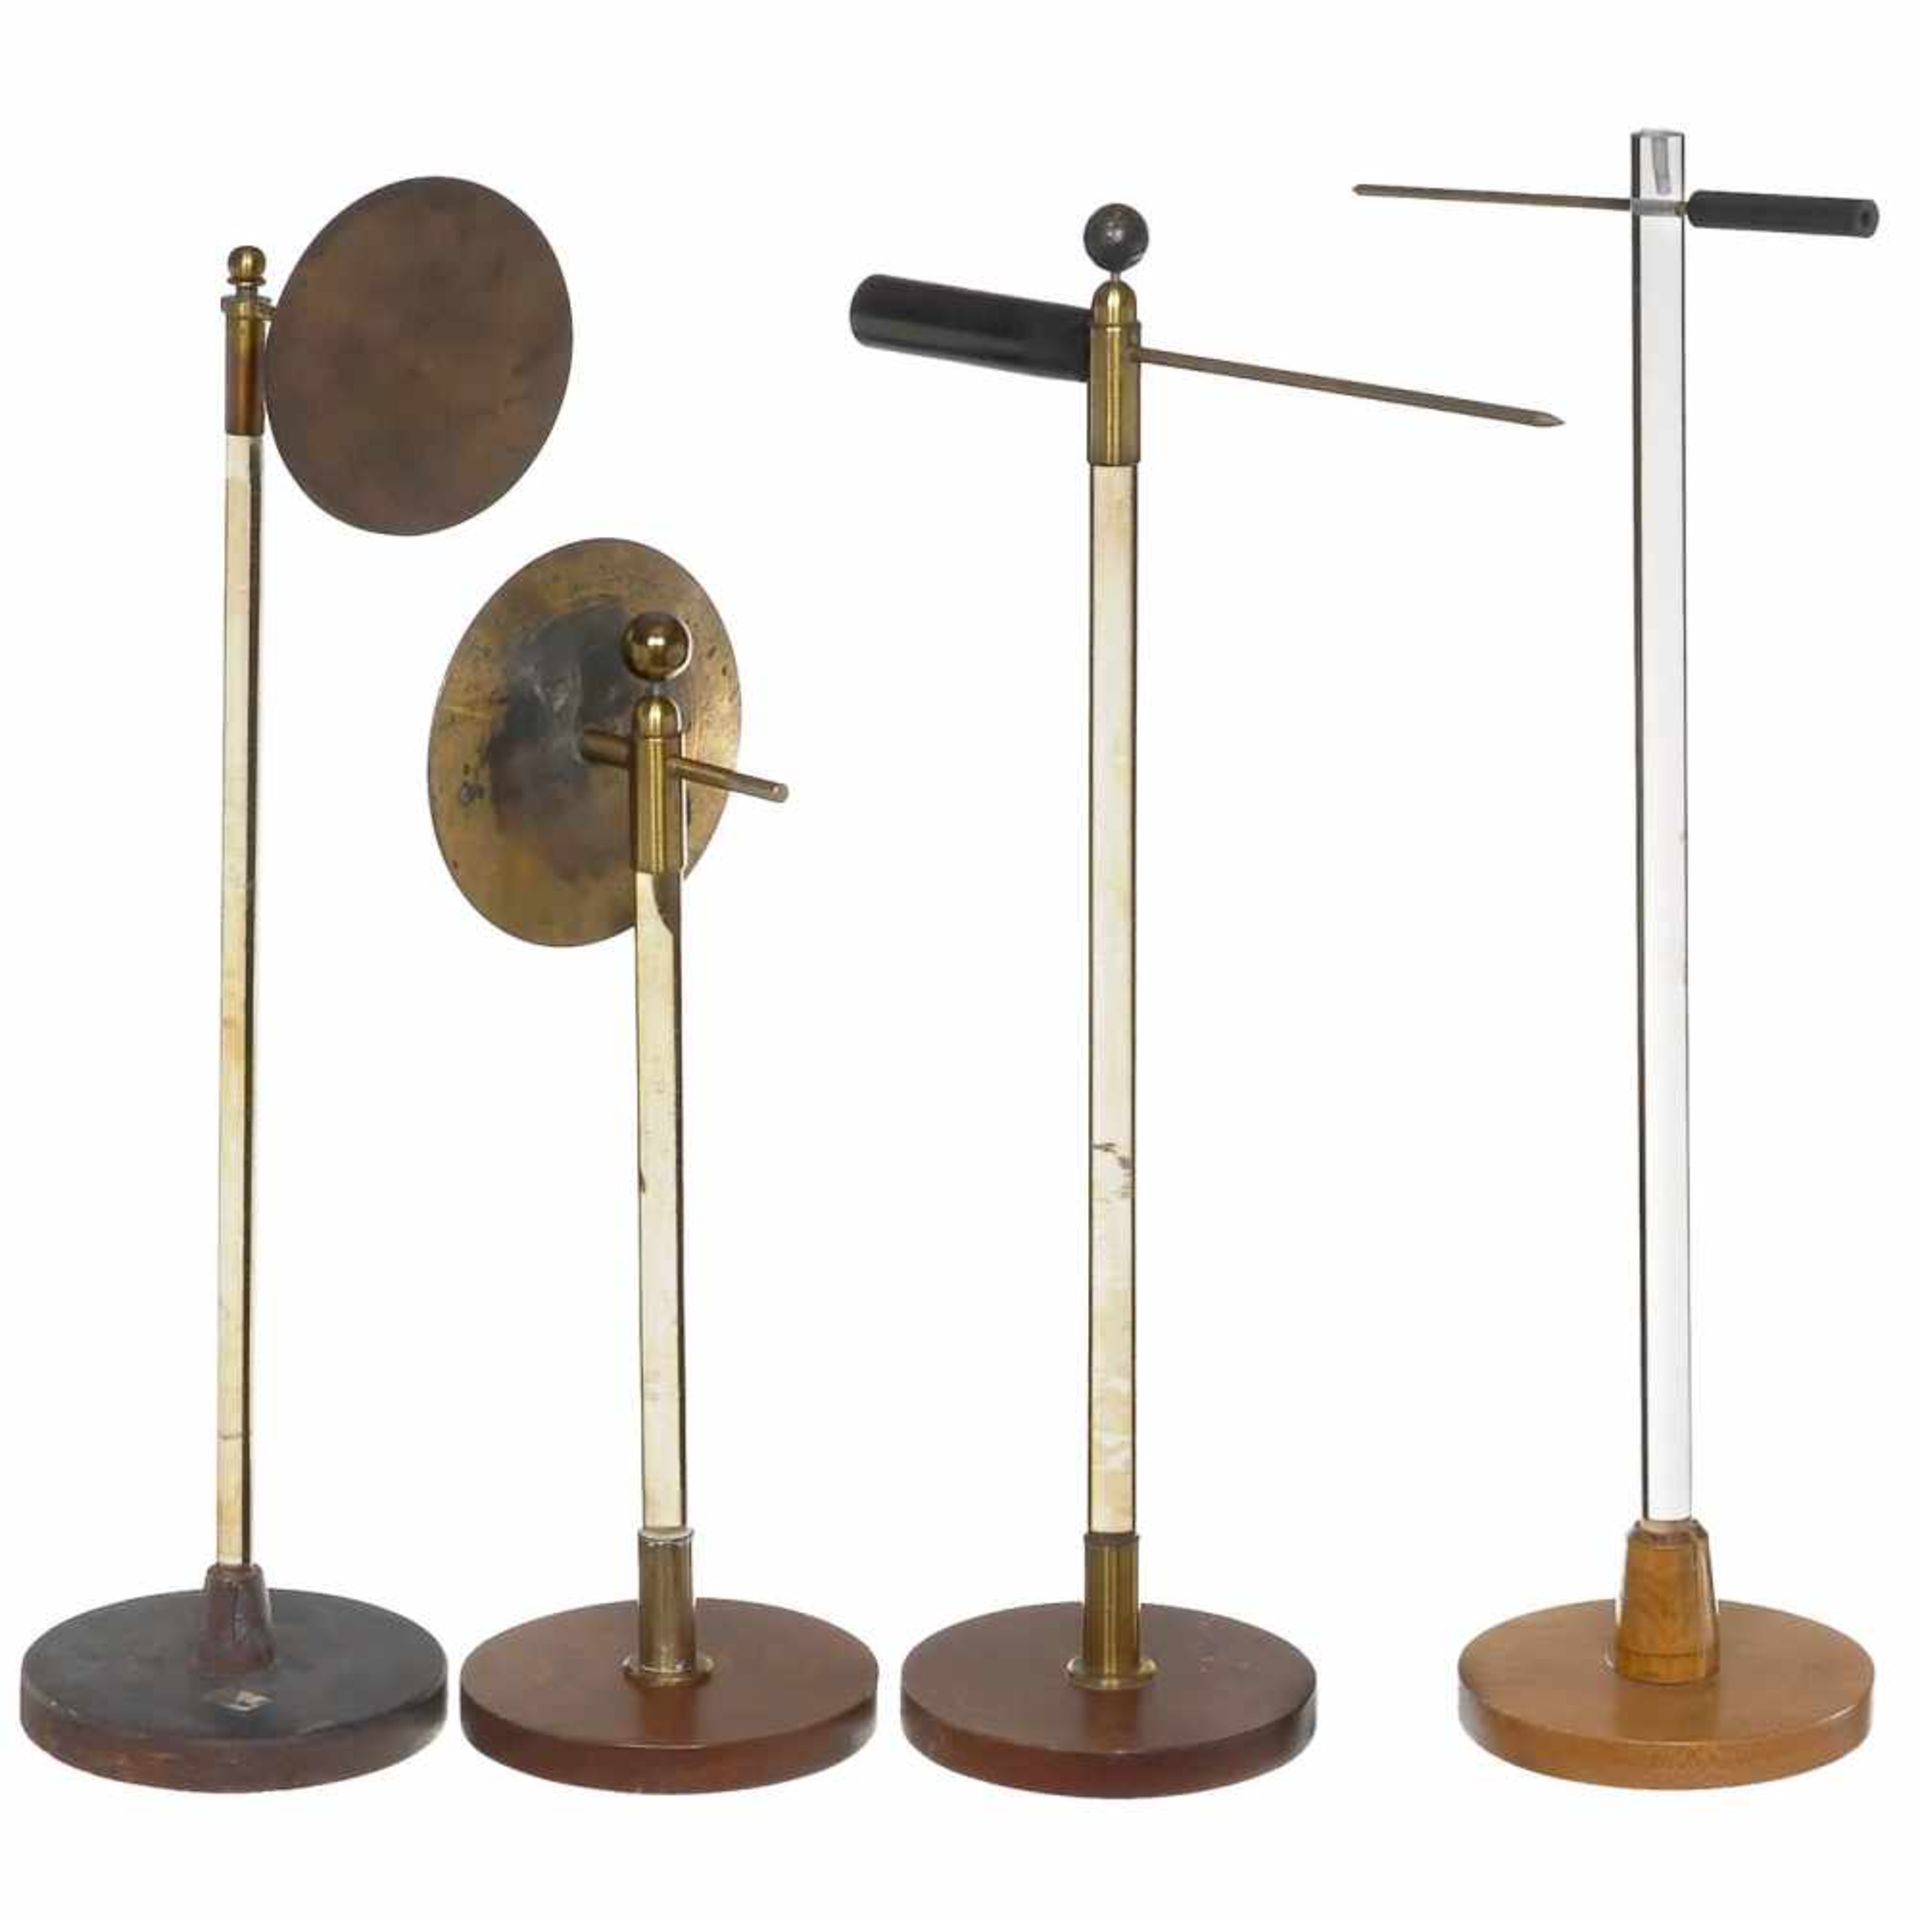 Electrostatic Experiment Devices, c. 19201) 3 dischargers with ebonite handles, one with hinge. - 2) - Bild 2 aus 6